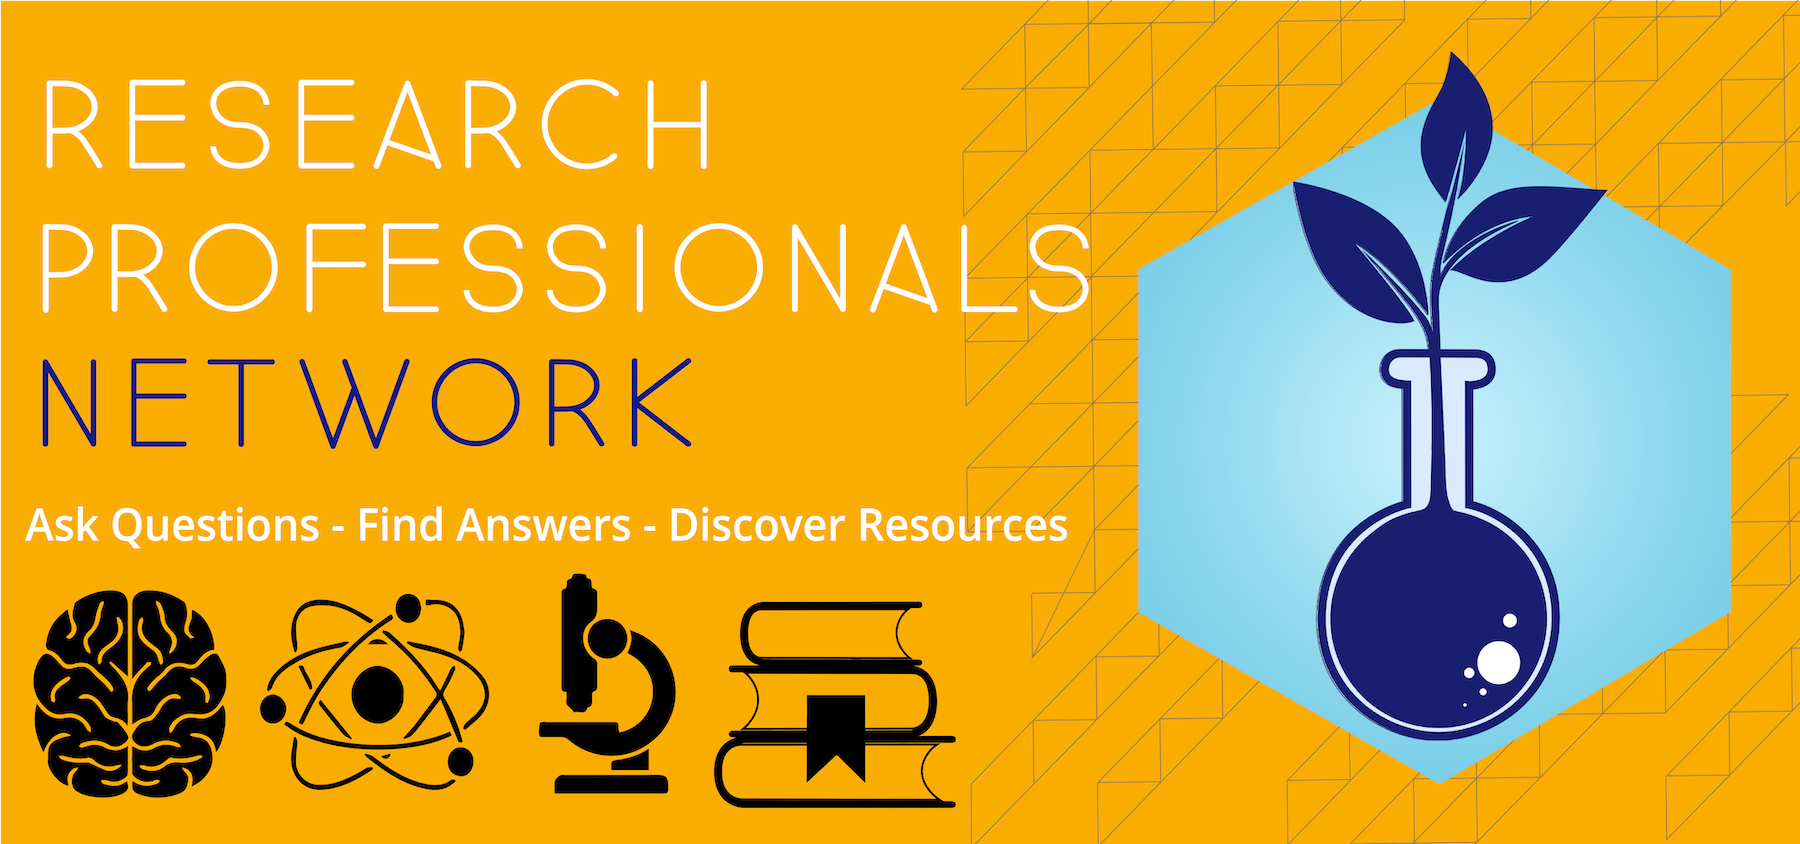 Research Pros Banner